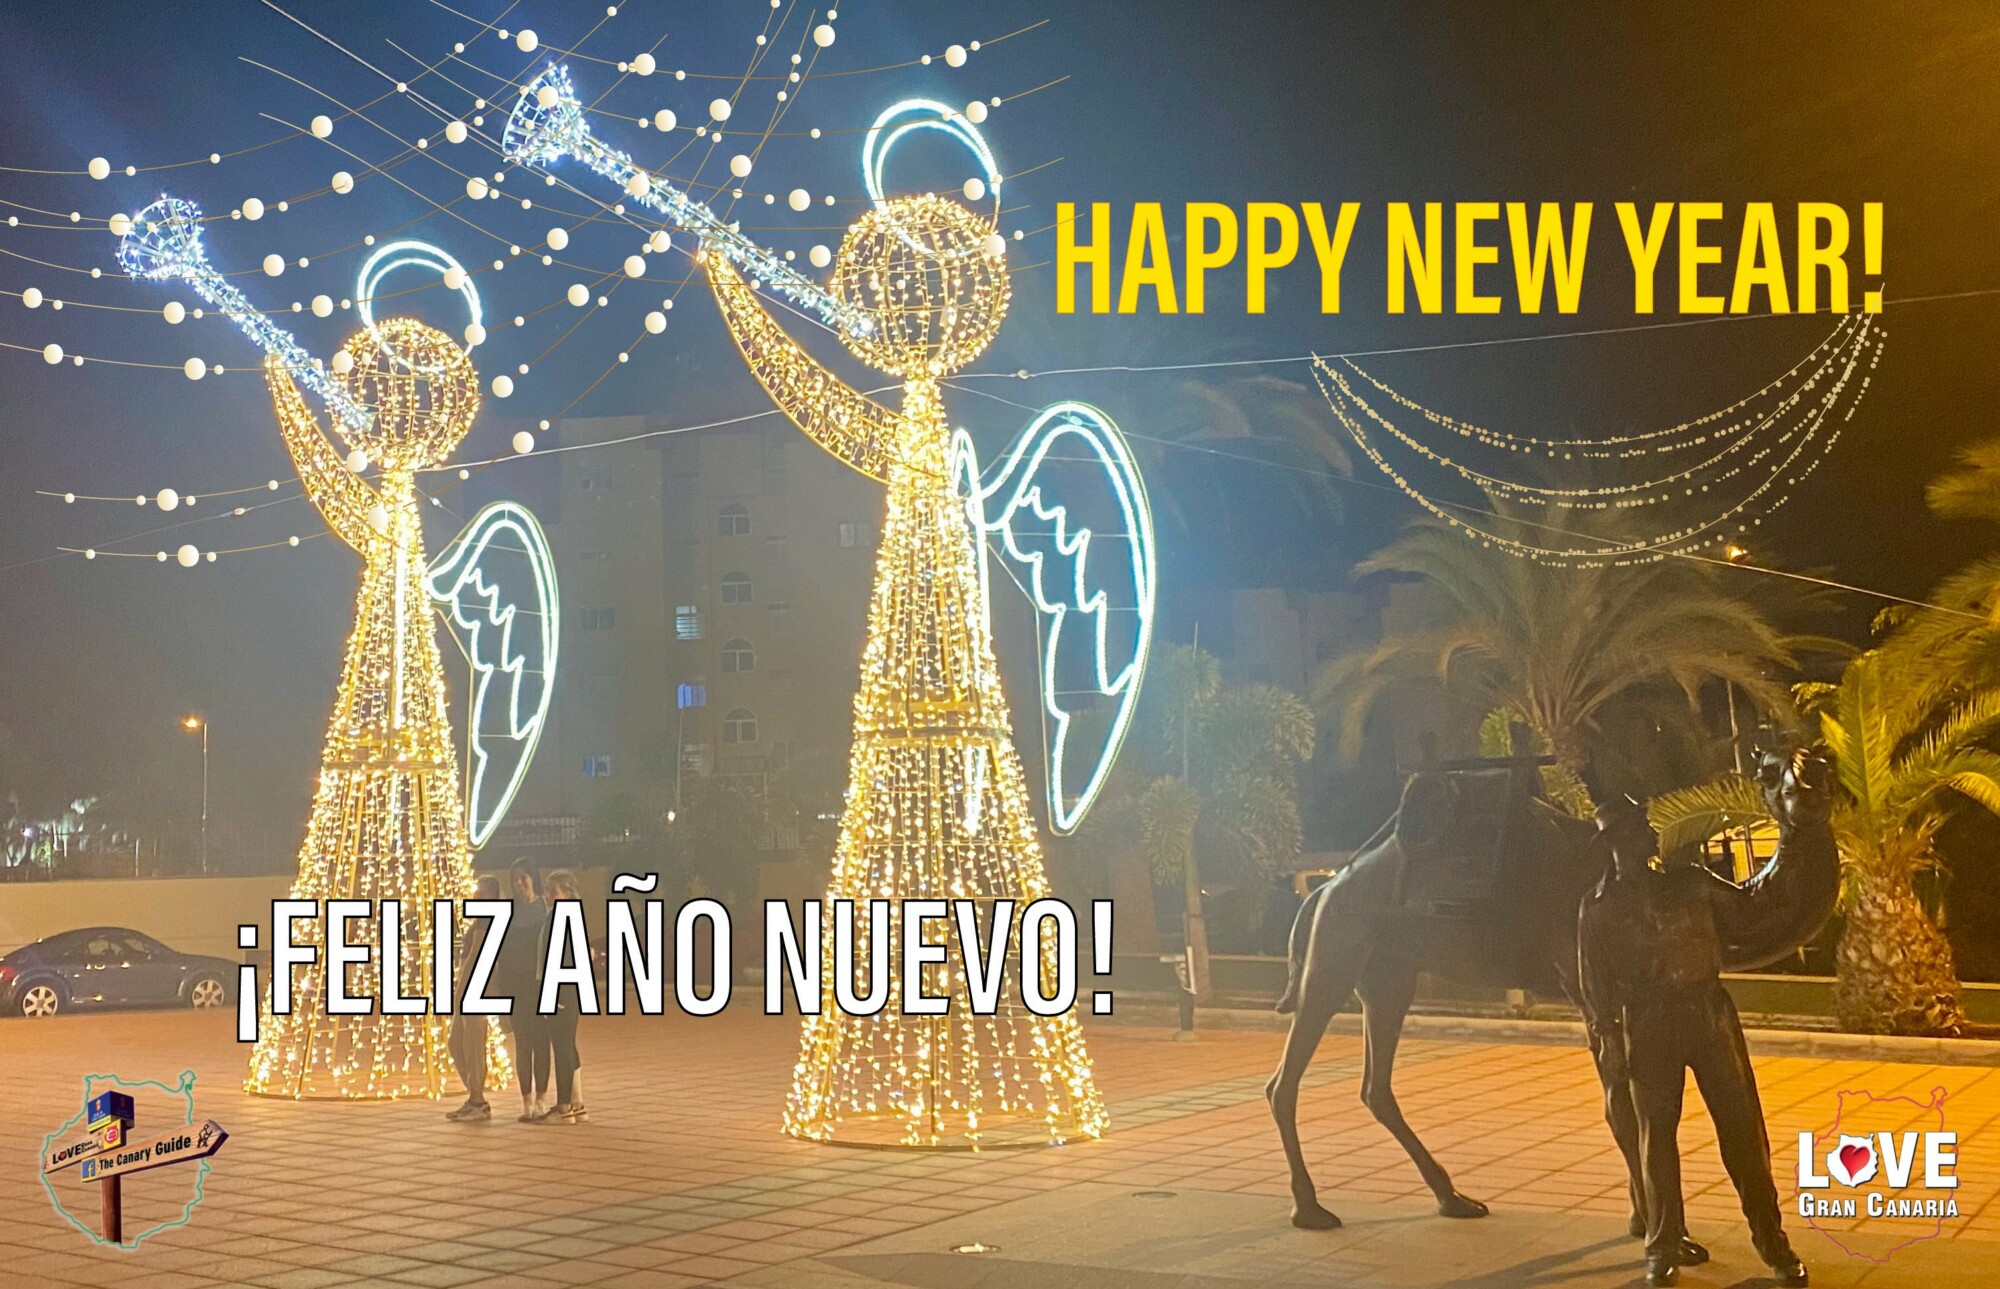 The Canary Guide: Nochevieja, New Year’s #WeekendTips 2022-23